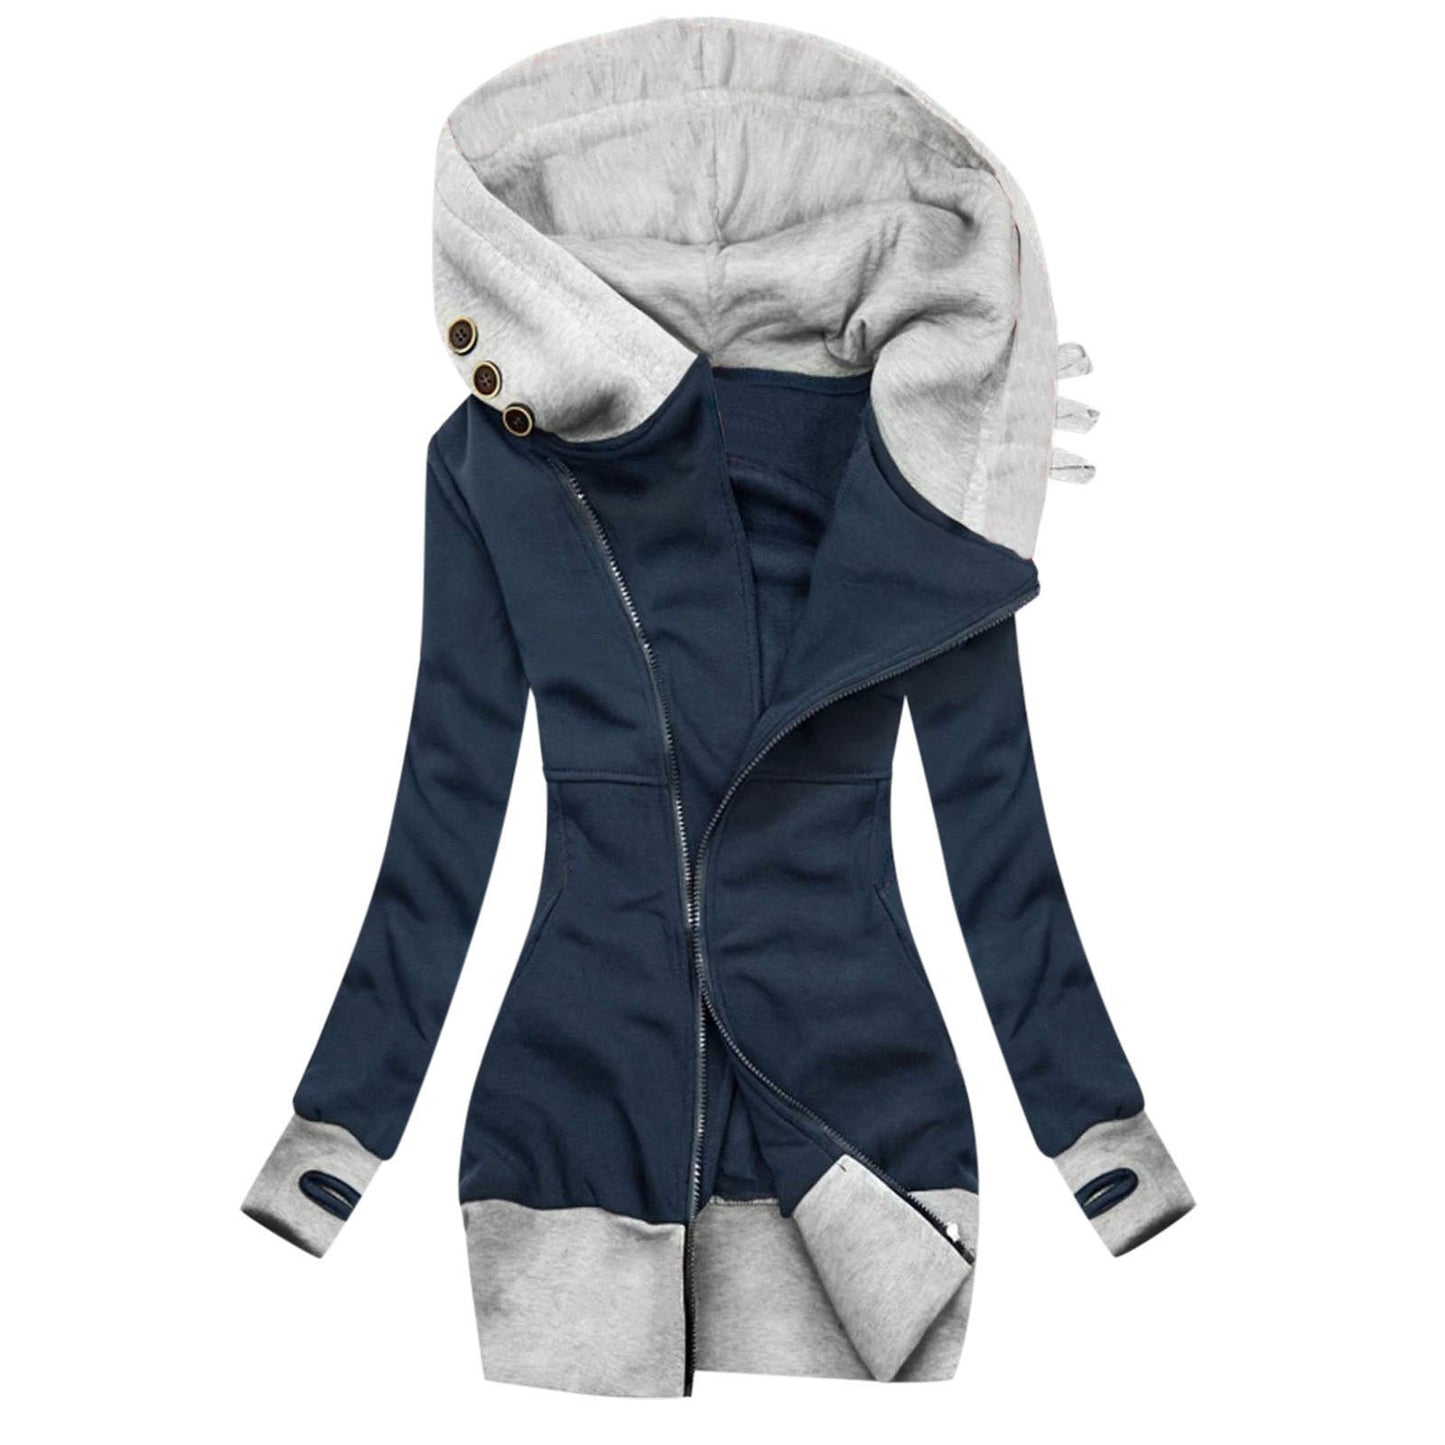 Europe and America Amazon Fall Winter New Women's Jacket Solid Color Hooded Long Sleeve Pocket Zipper Sweater Women